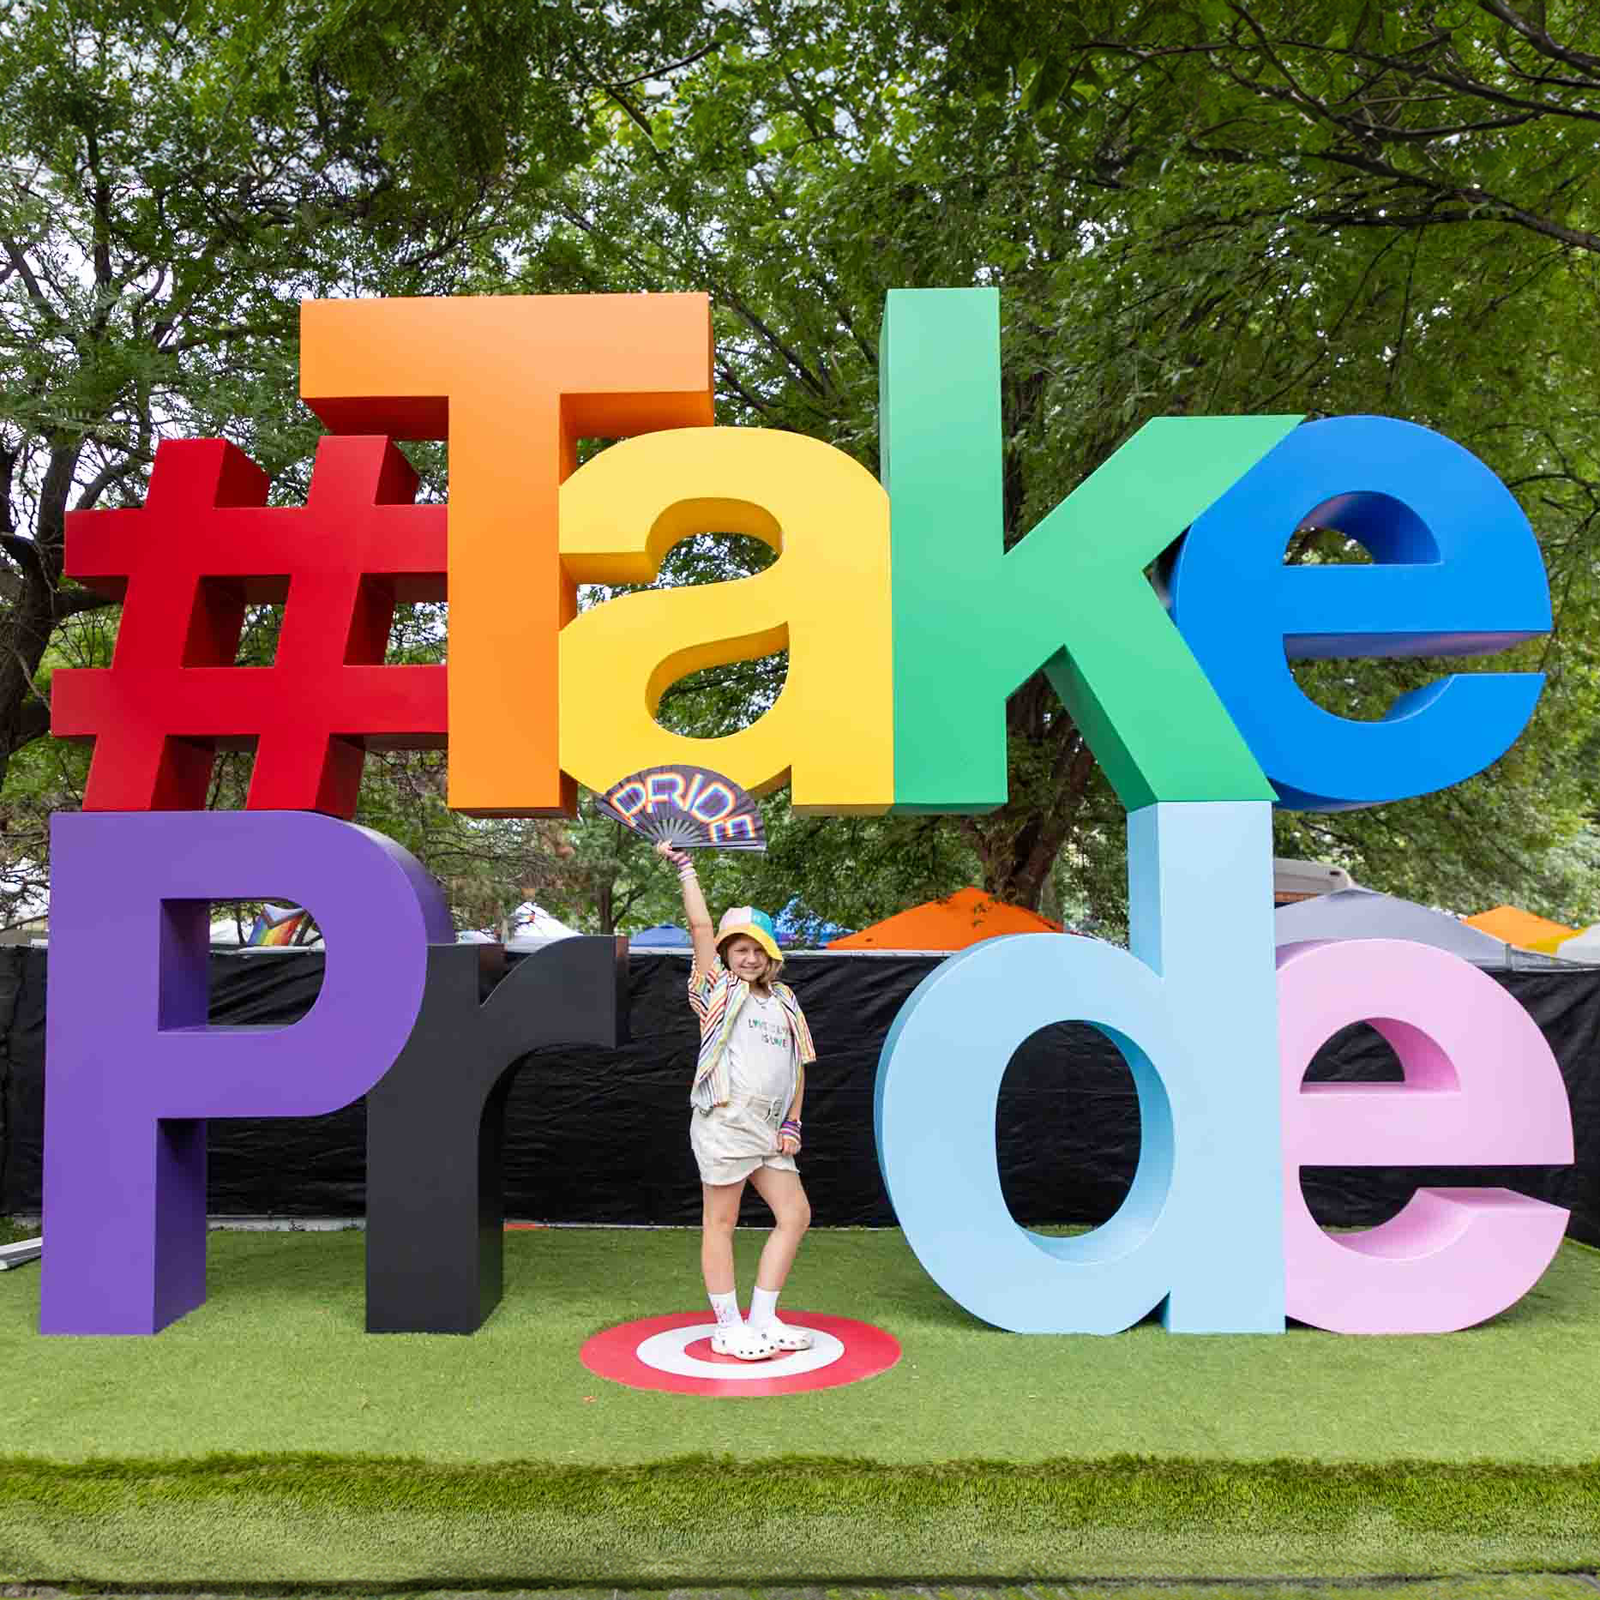 Alison Malone photographs queer families and LGBTQ+ community at Pride event in Loring Park